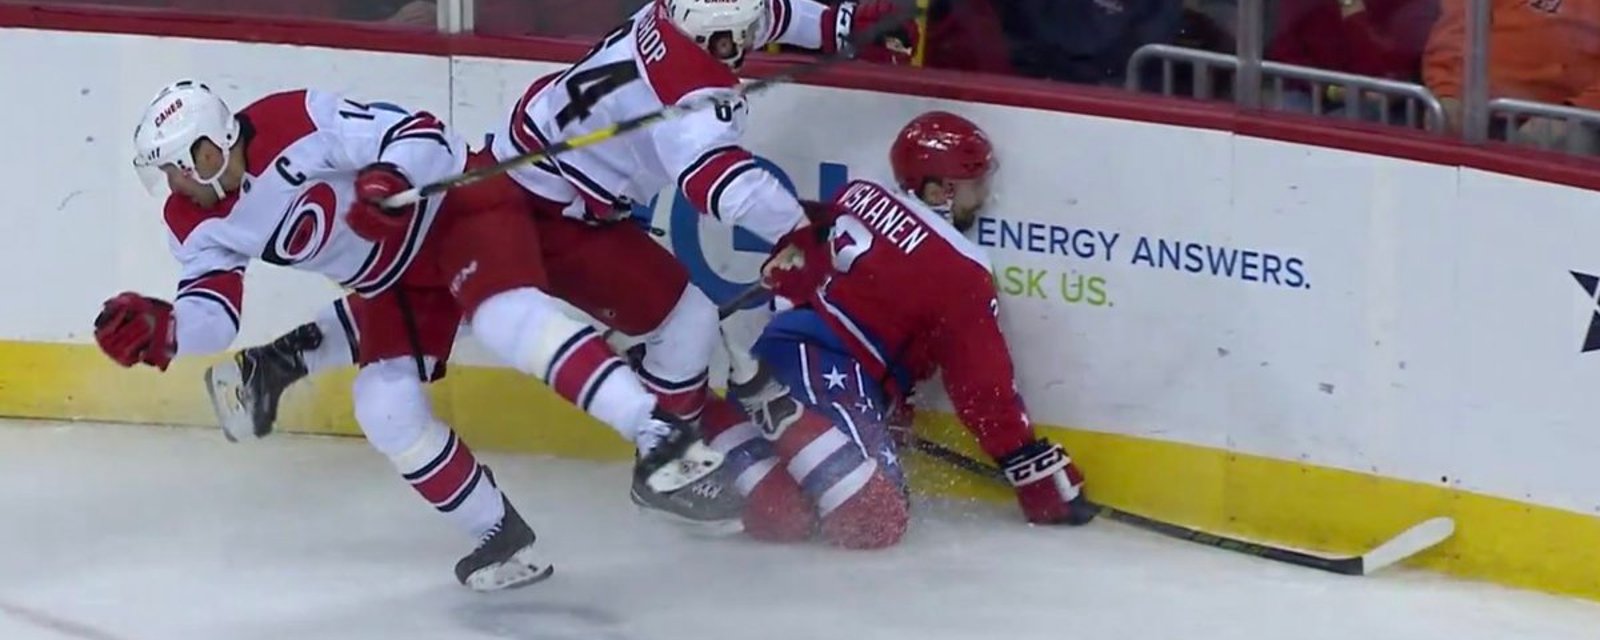 Niskanen leaves game after terrifying face-first hit into boards! 